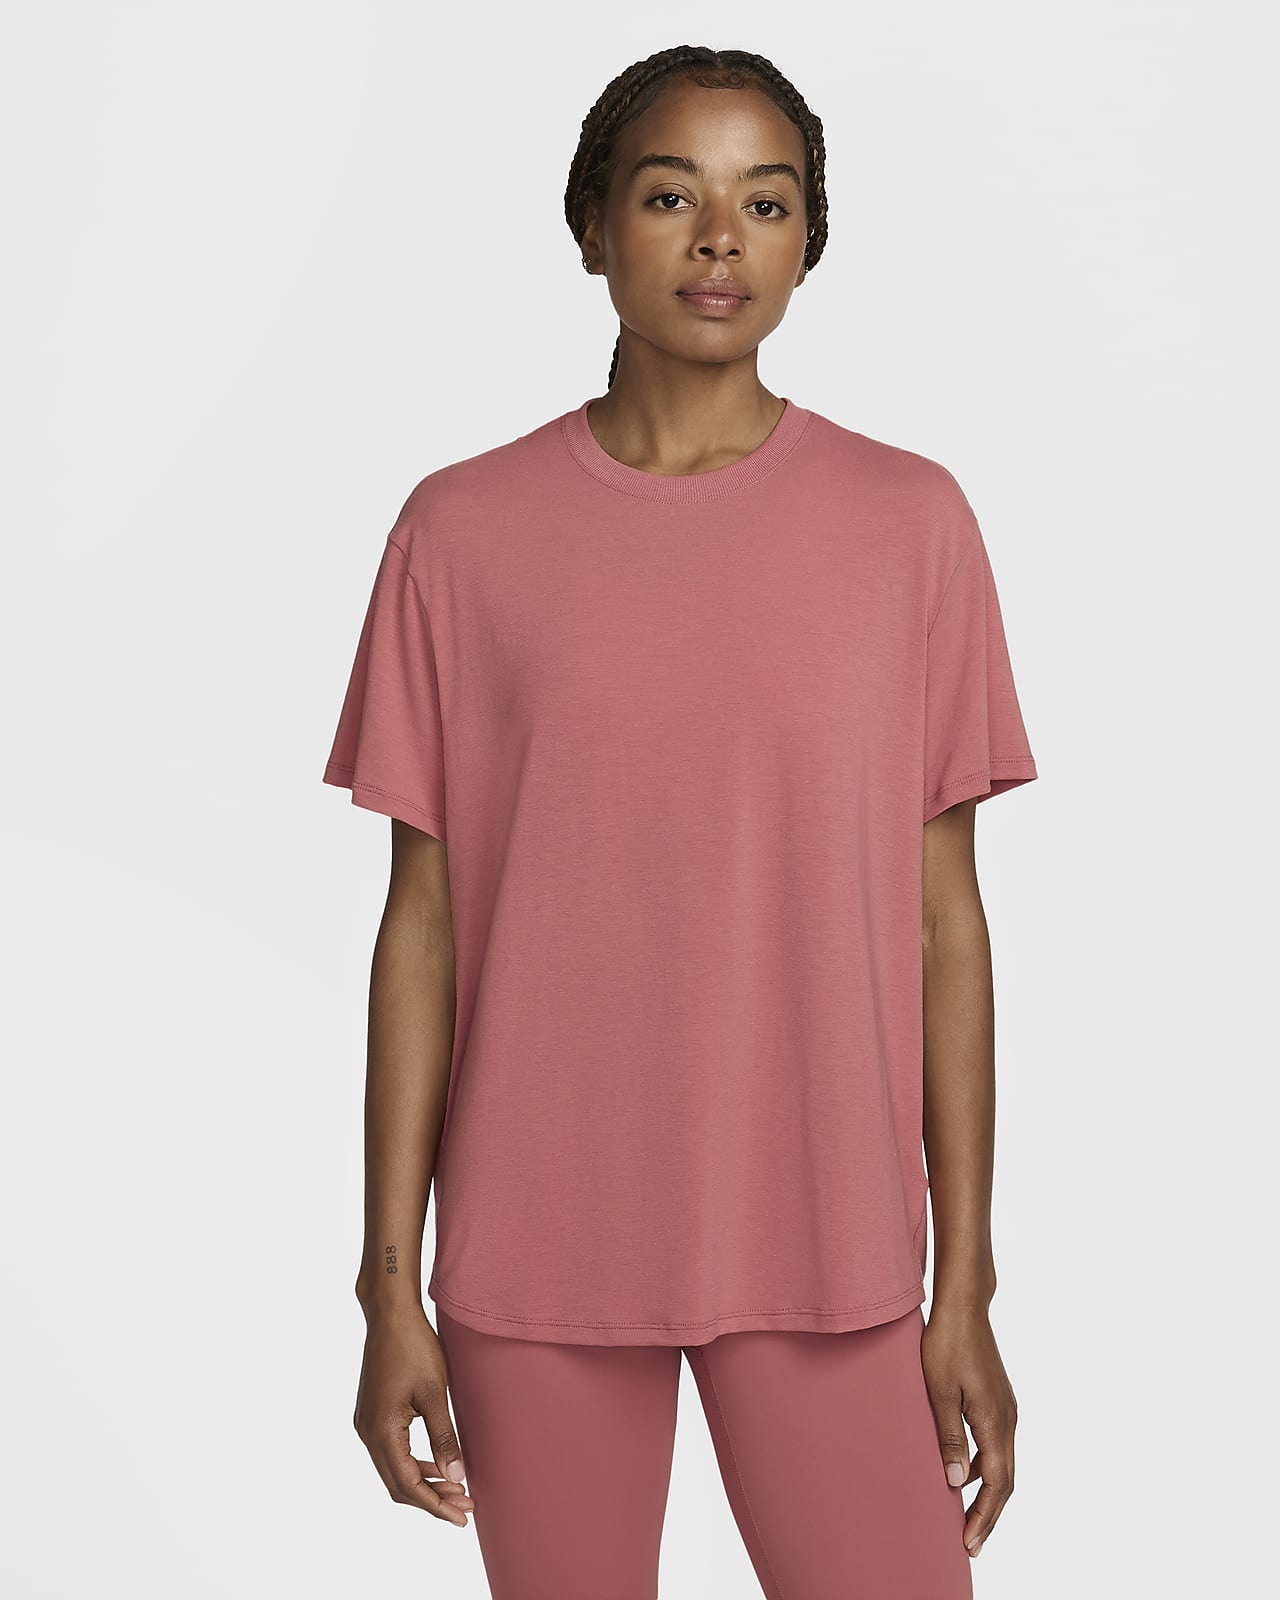 Top a manica corta Dri-FIT Nike One Relaxed – Donna